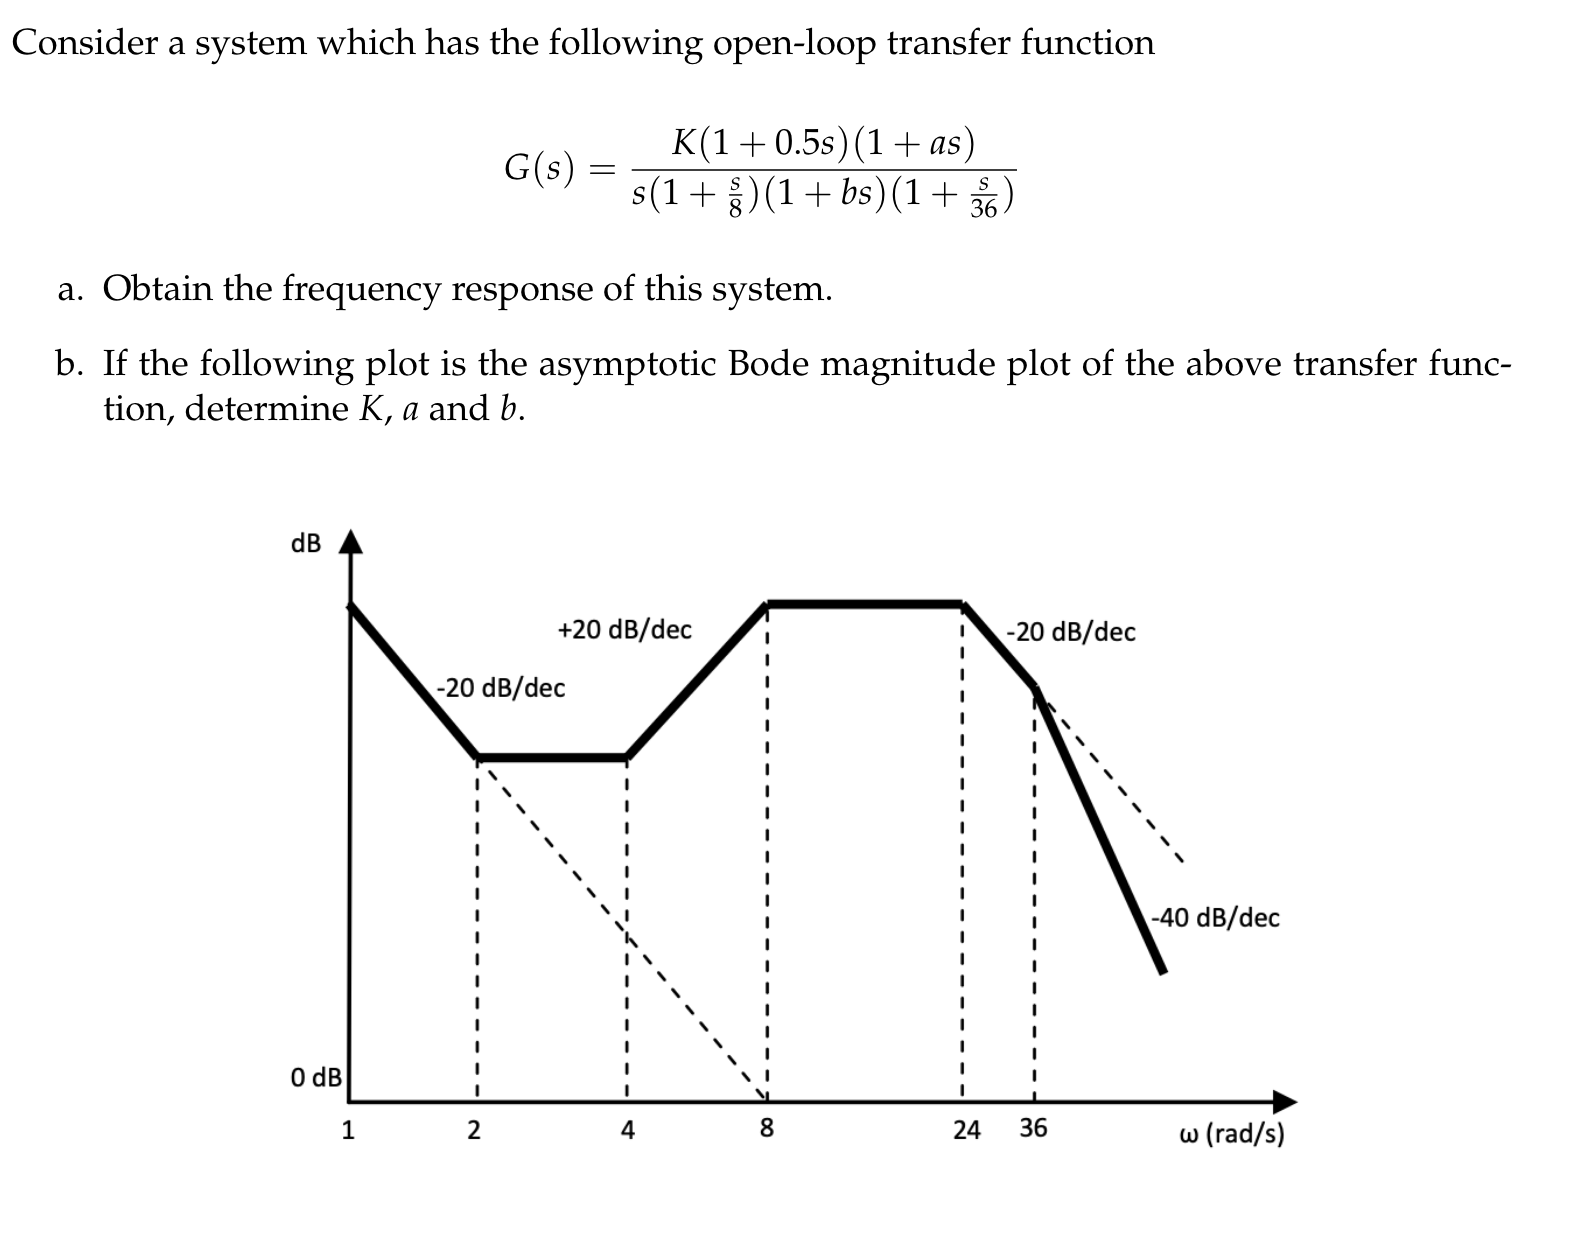 Consider a system which has the following open-loop transfer function
K(1+ 0.5s)(1 + as)
G(s) =
s(1+)(1+ bs)(1+ %)
8
a. Obtain the frequency response of this system.
b. If the following plot is the asymptotic Bode magnitude plot of the above transfer func-
tion, determine K, a and b.
